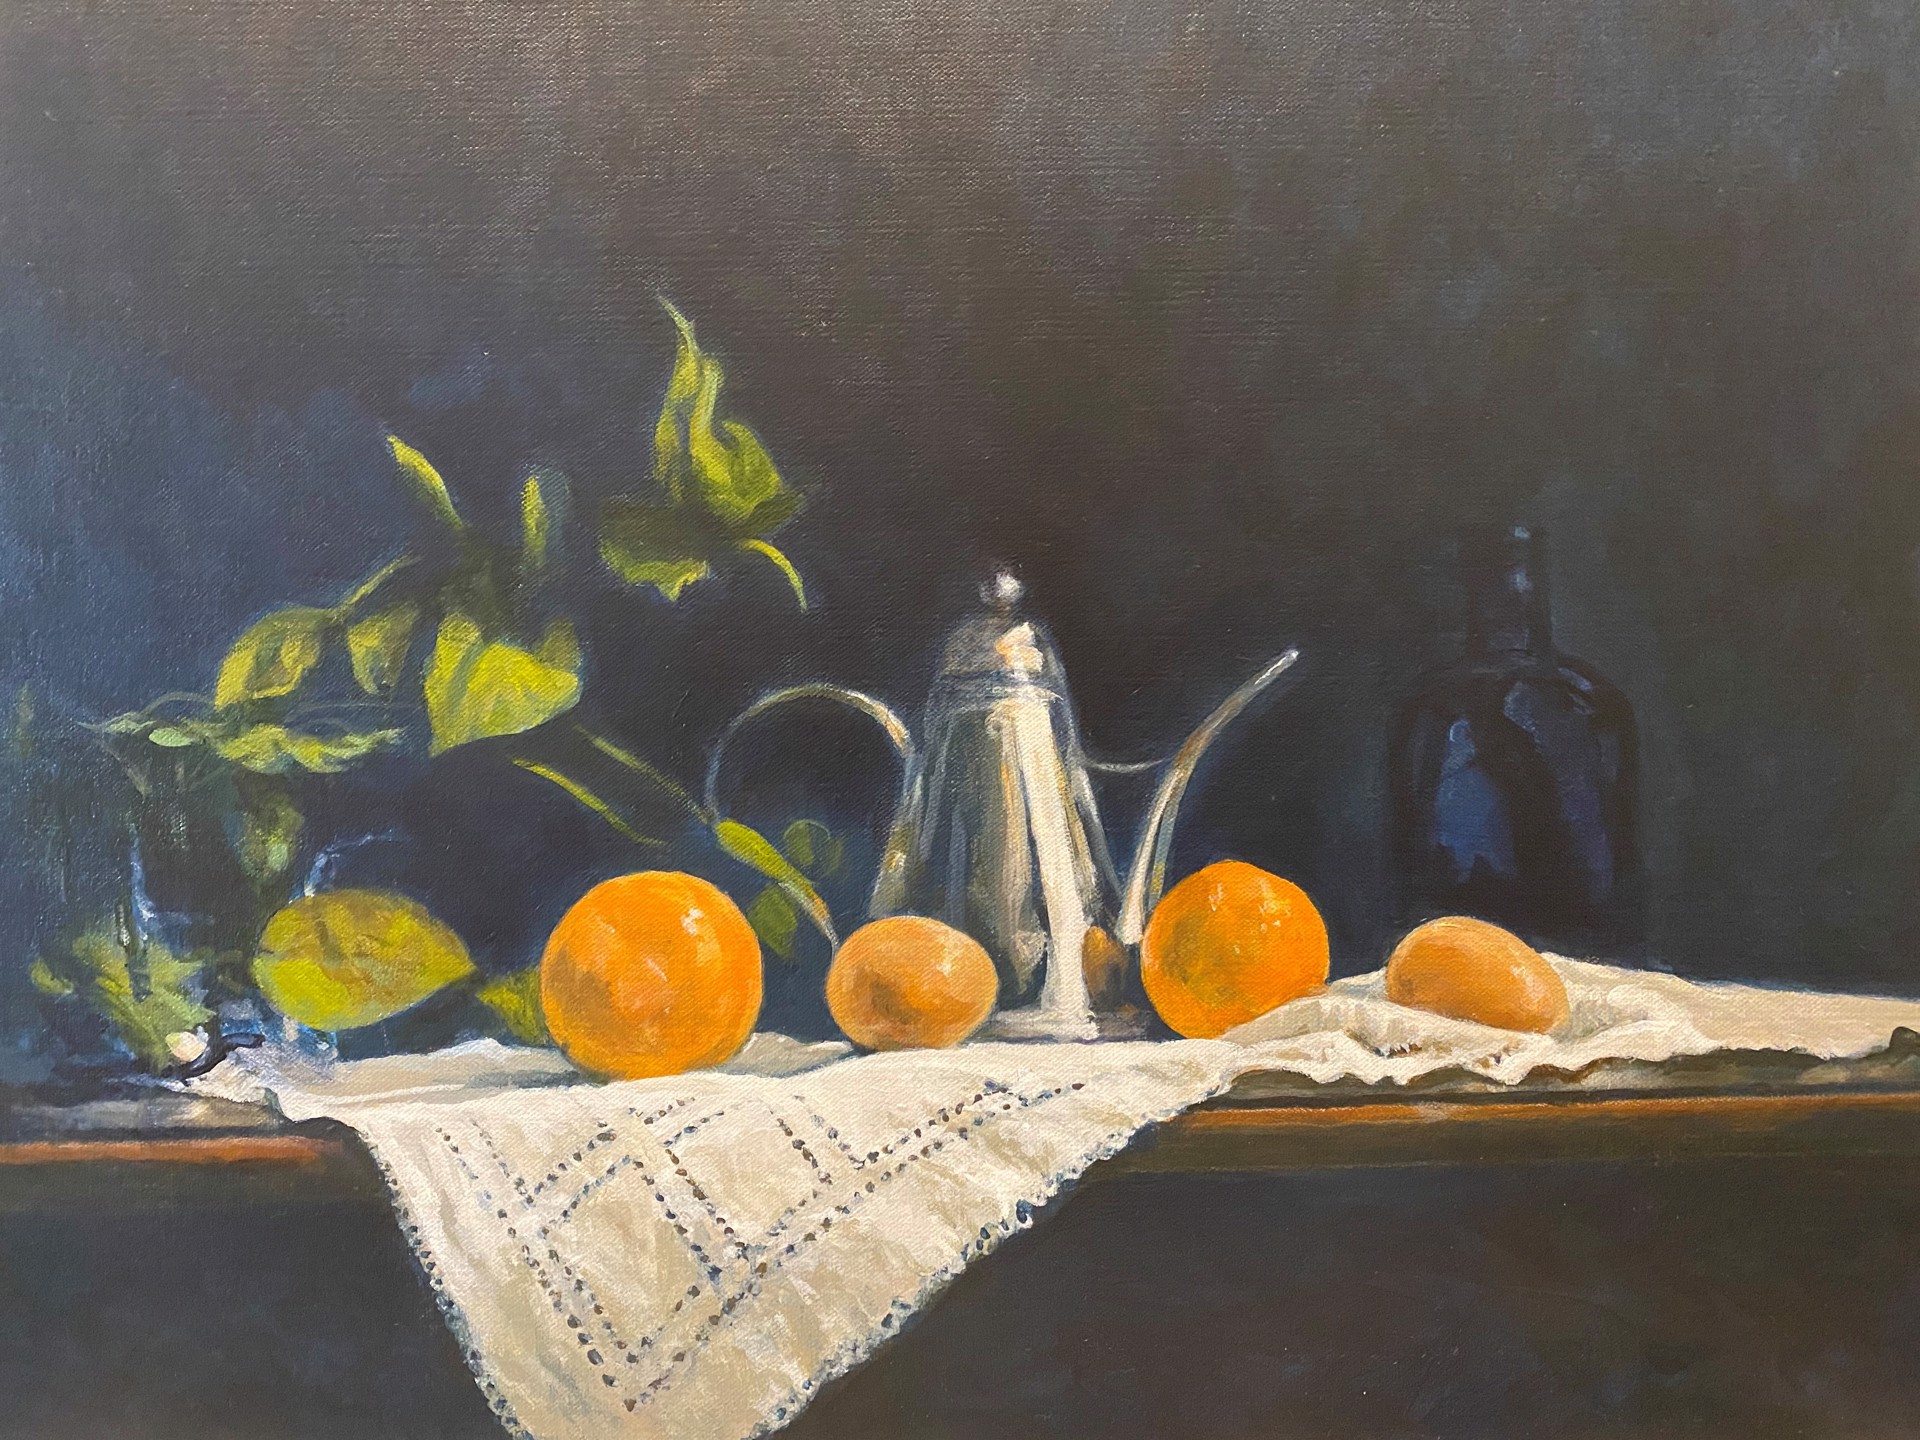 Still Life with Oranges by Douglas H. Caves Sr.